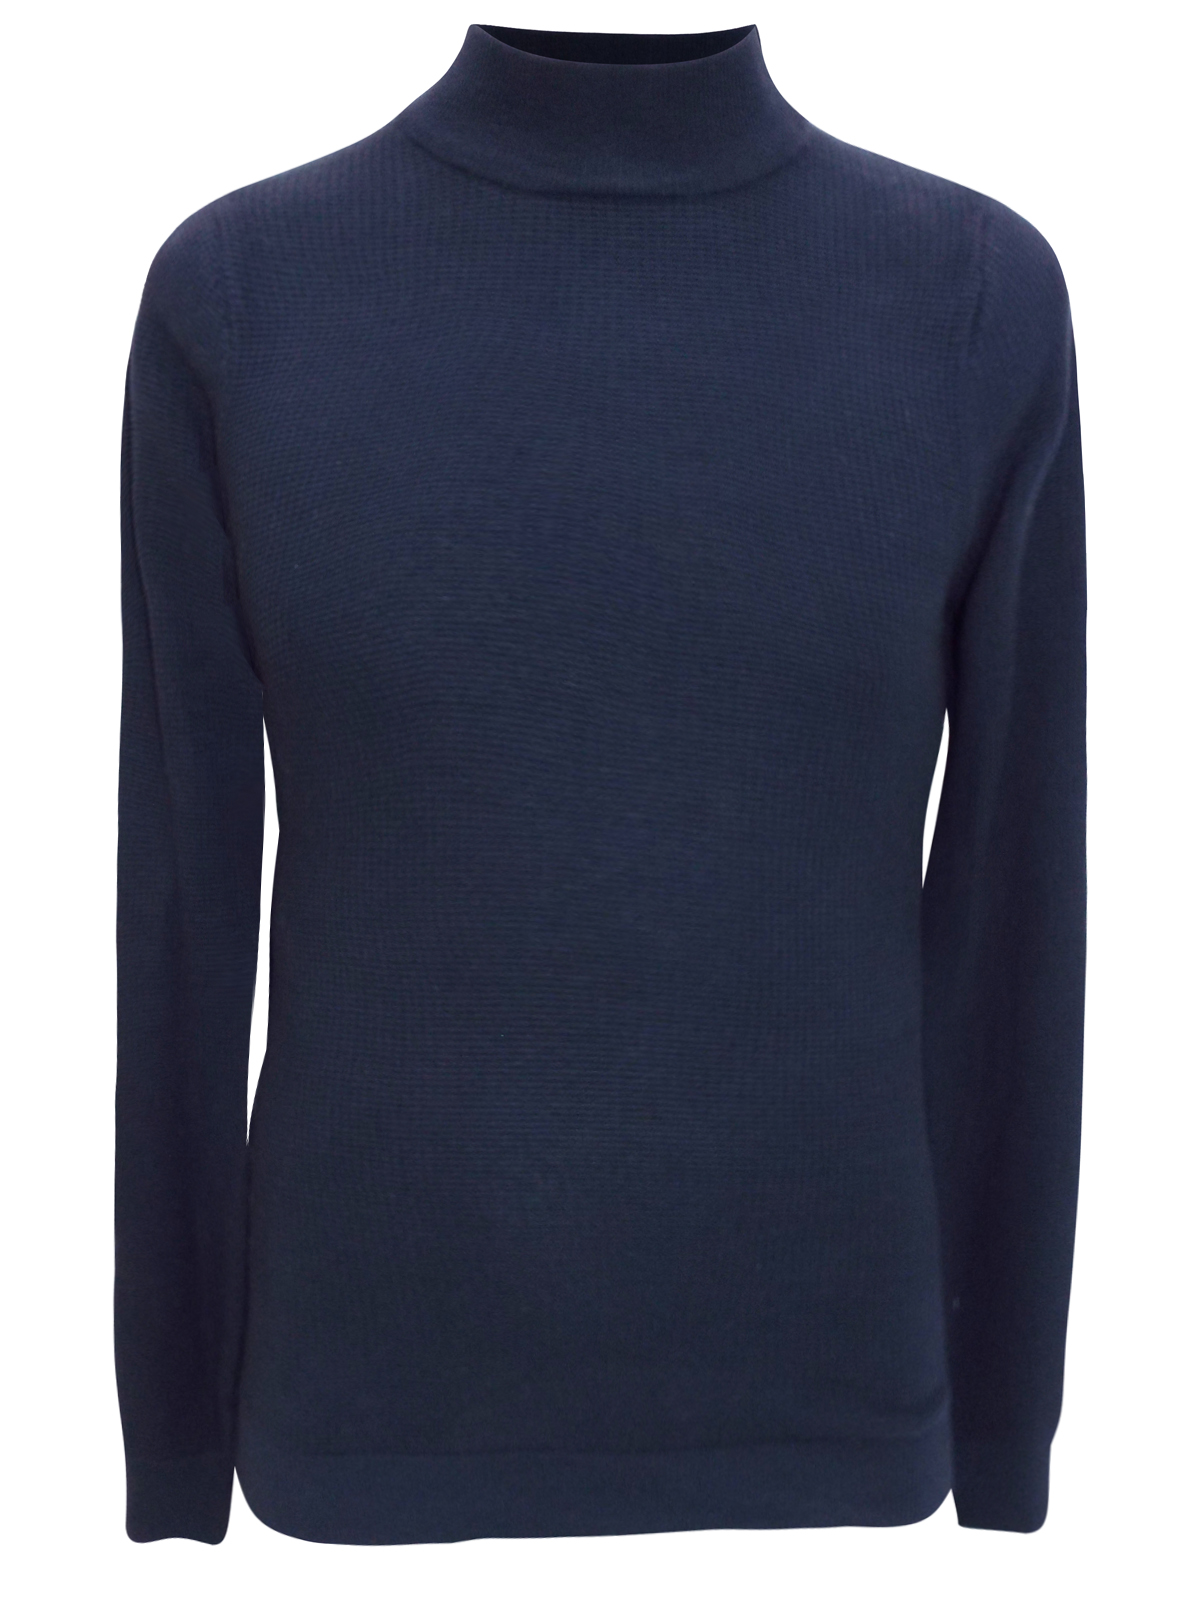 N3xt NAVY Pure Cotton High Neck Knitted Jumper - Size XSmall to XLarge